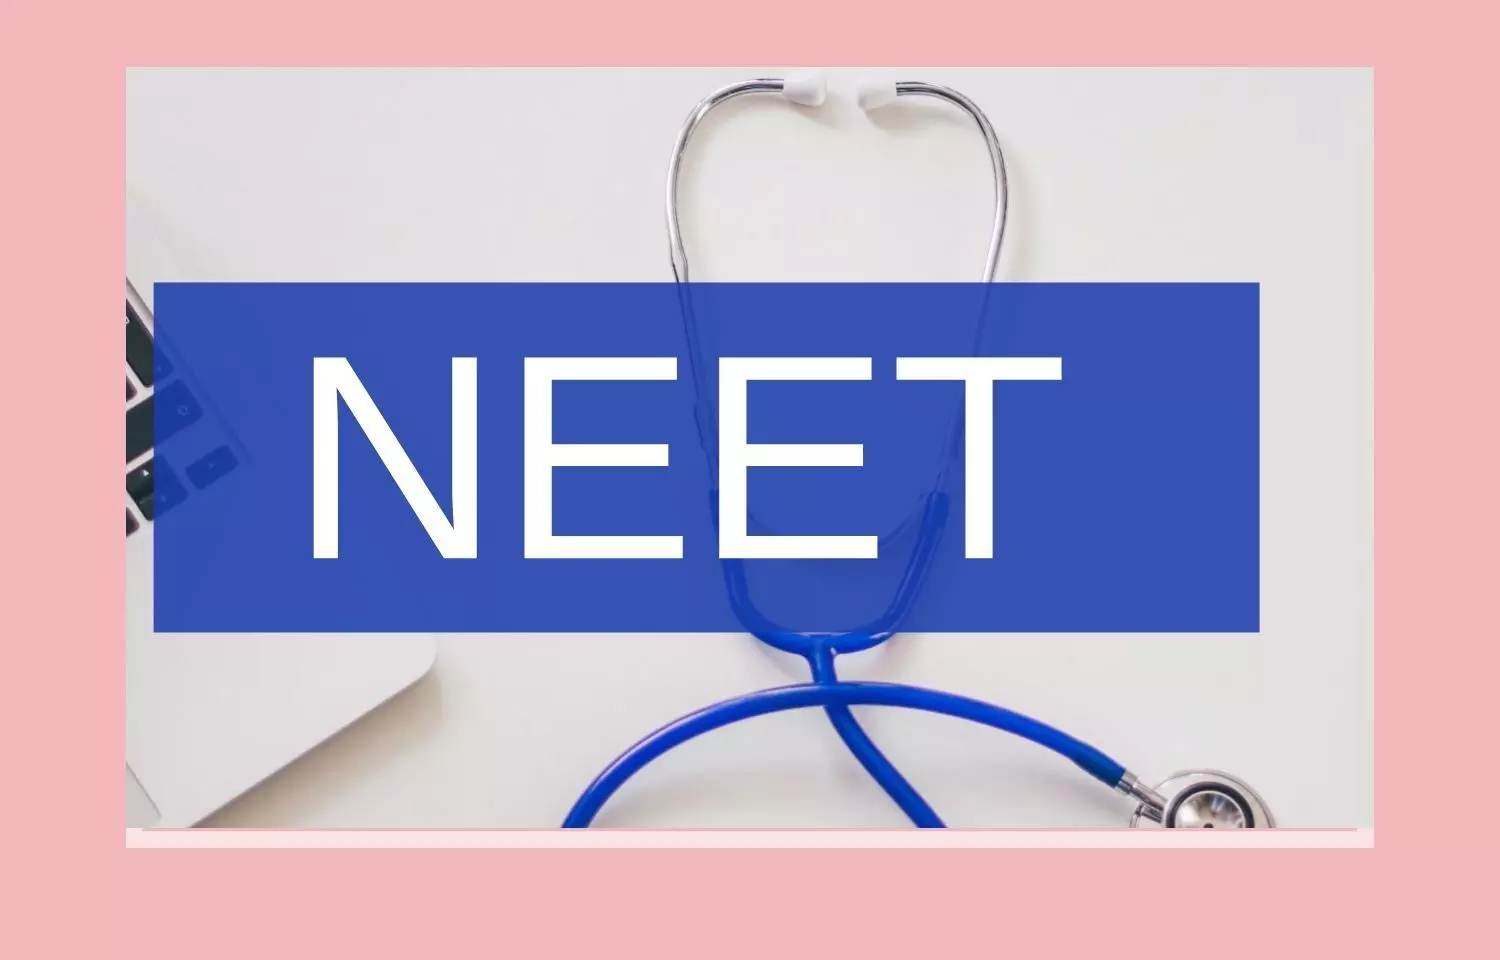 Only candidates with Physics, Chemistry, Biology, English in 10+2 eligible for NEET: NMC tells Supreme Court